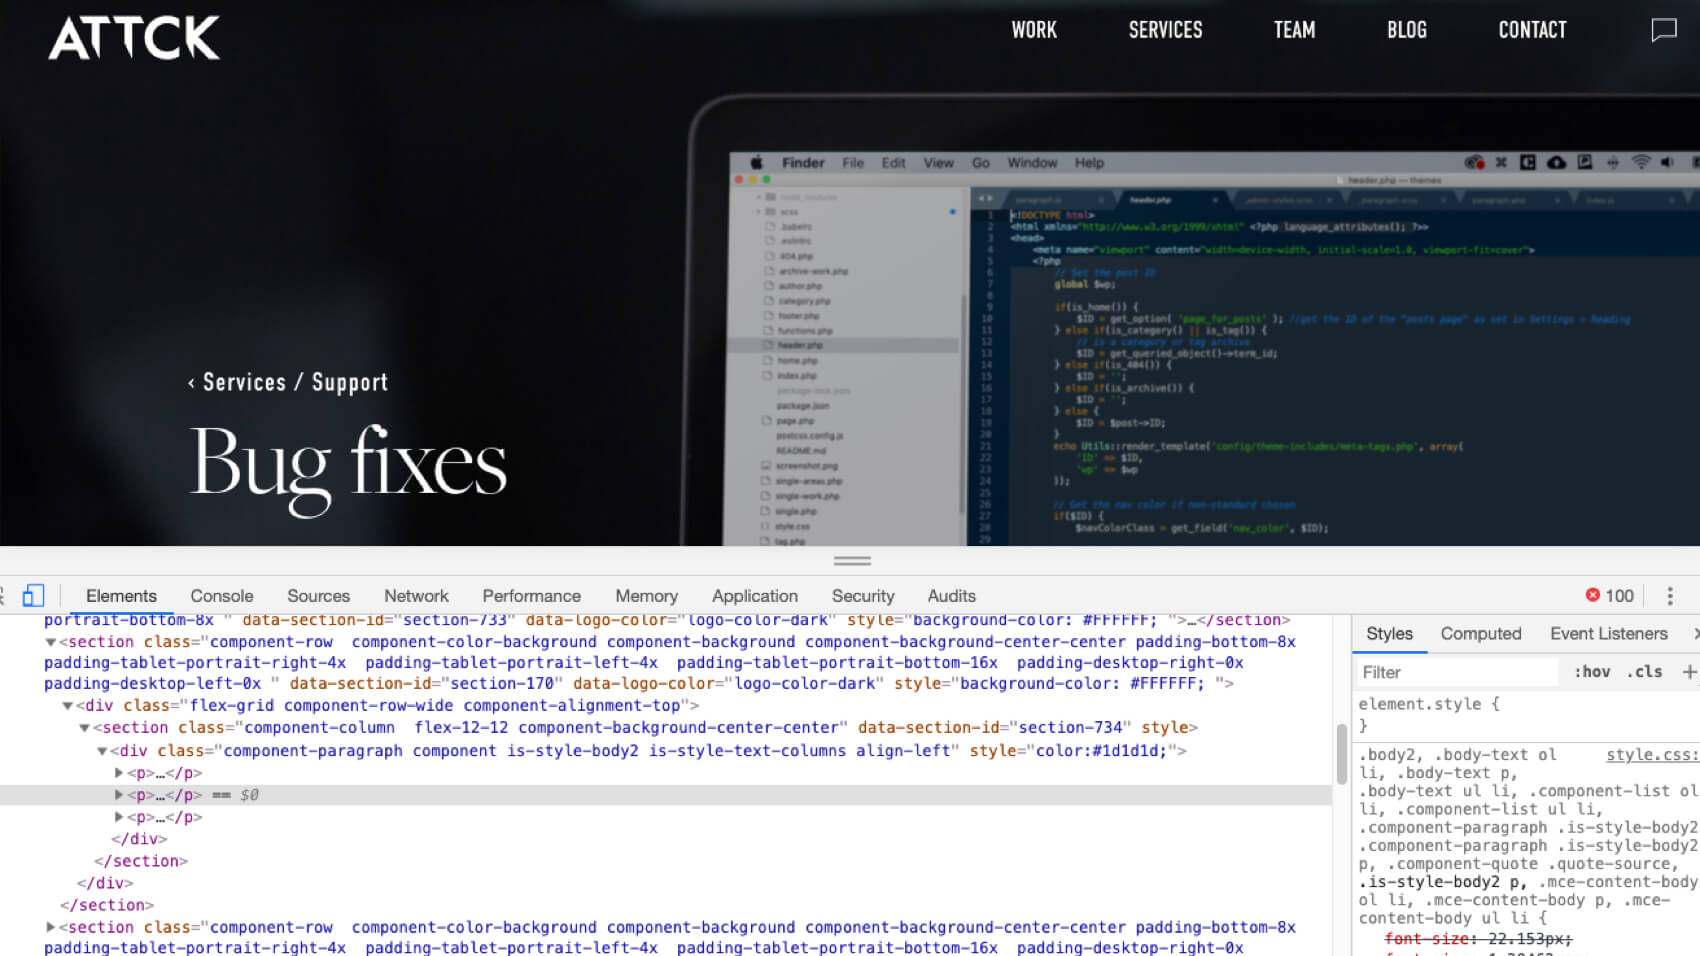 Screenshot of source code for Bug fixes page on attck.com